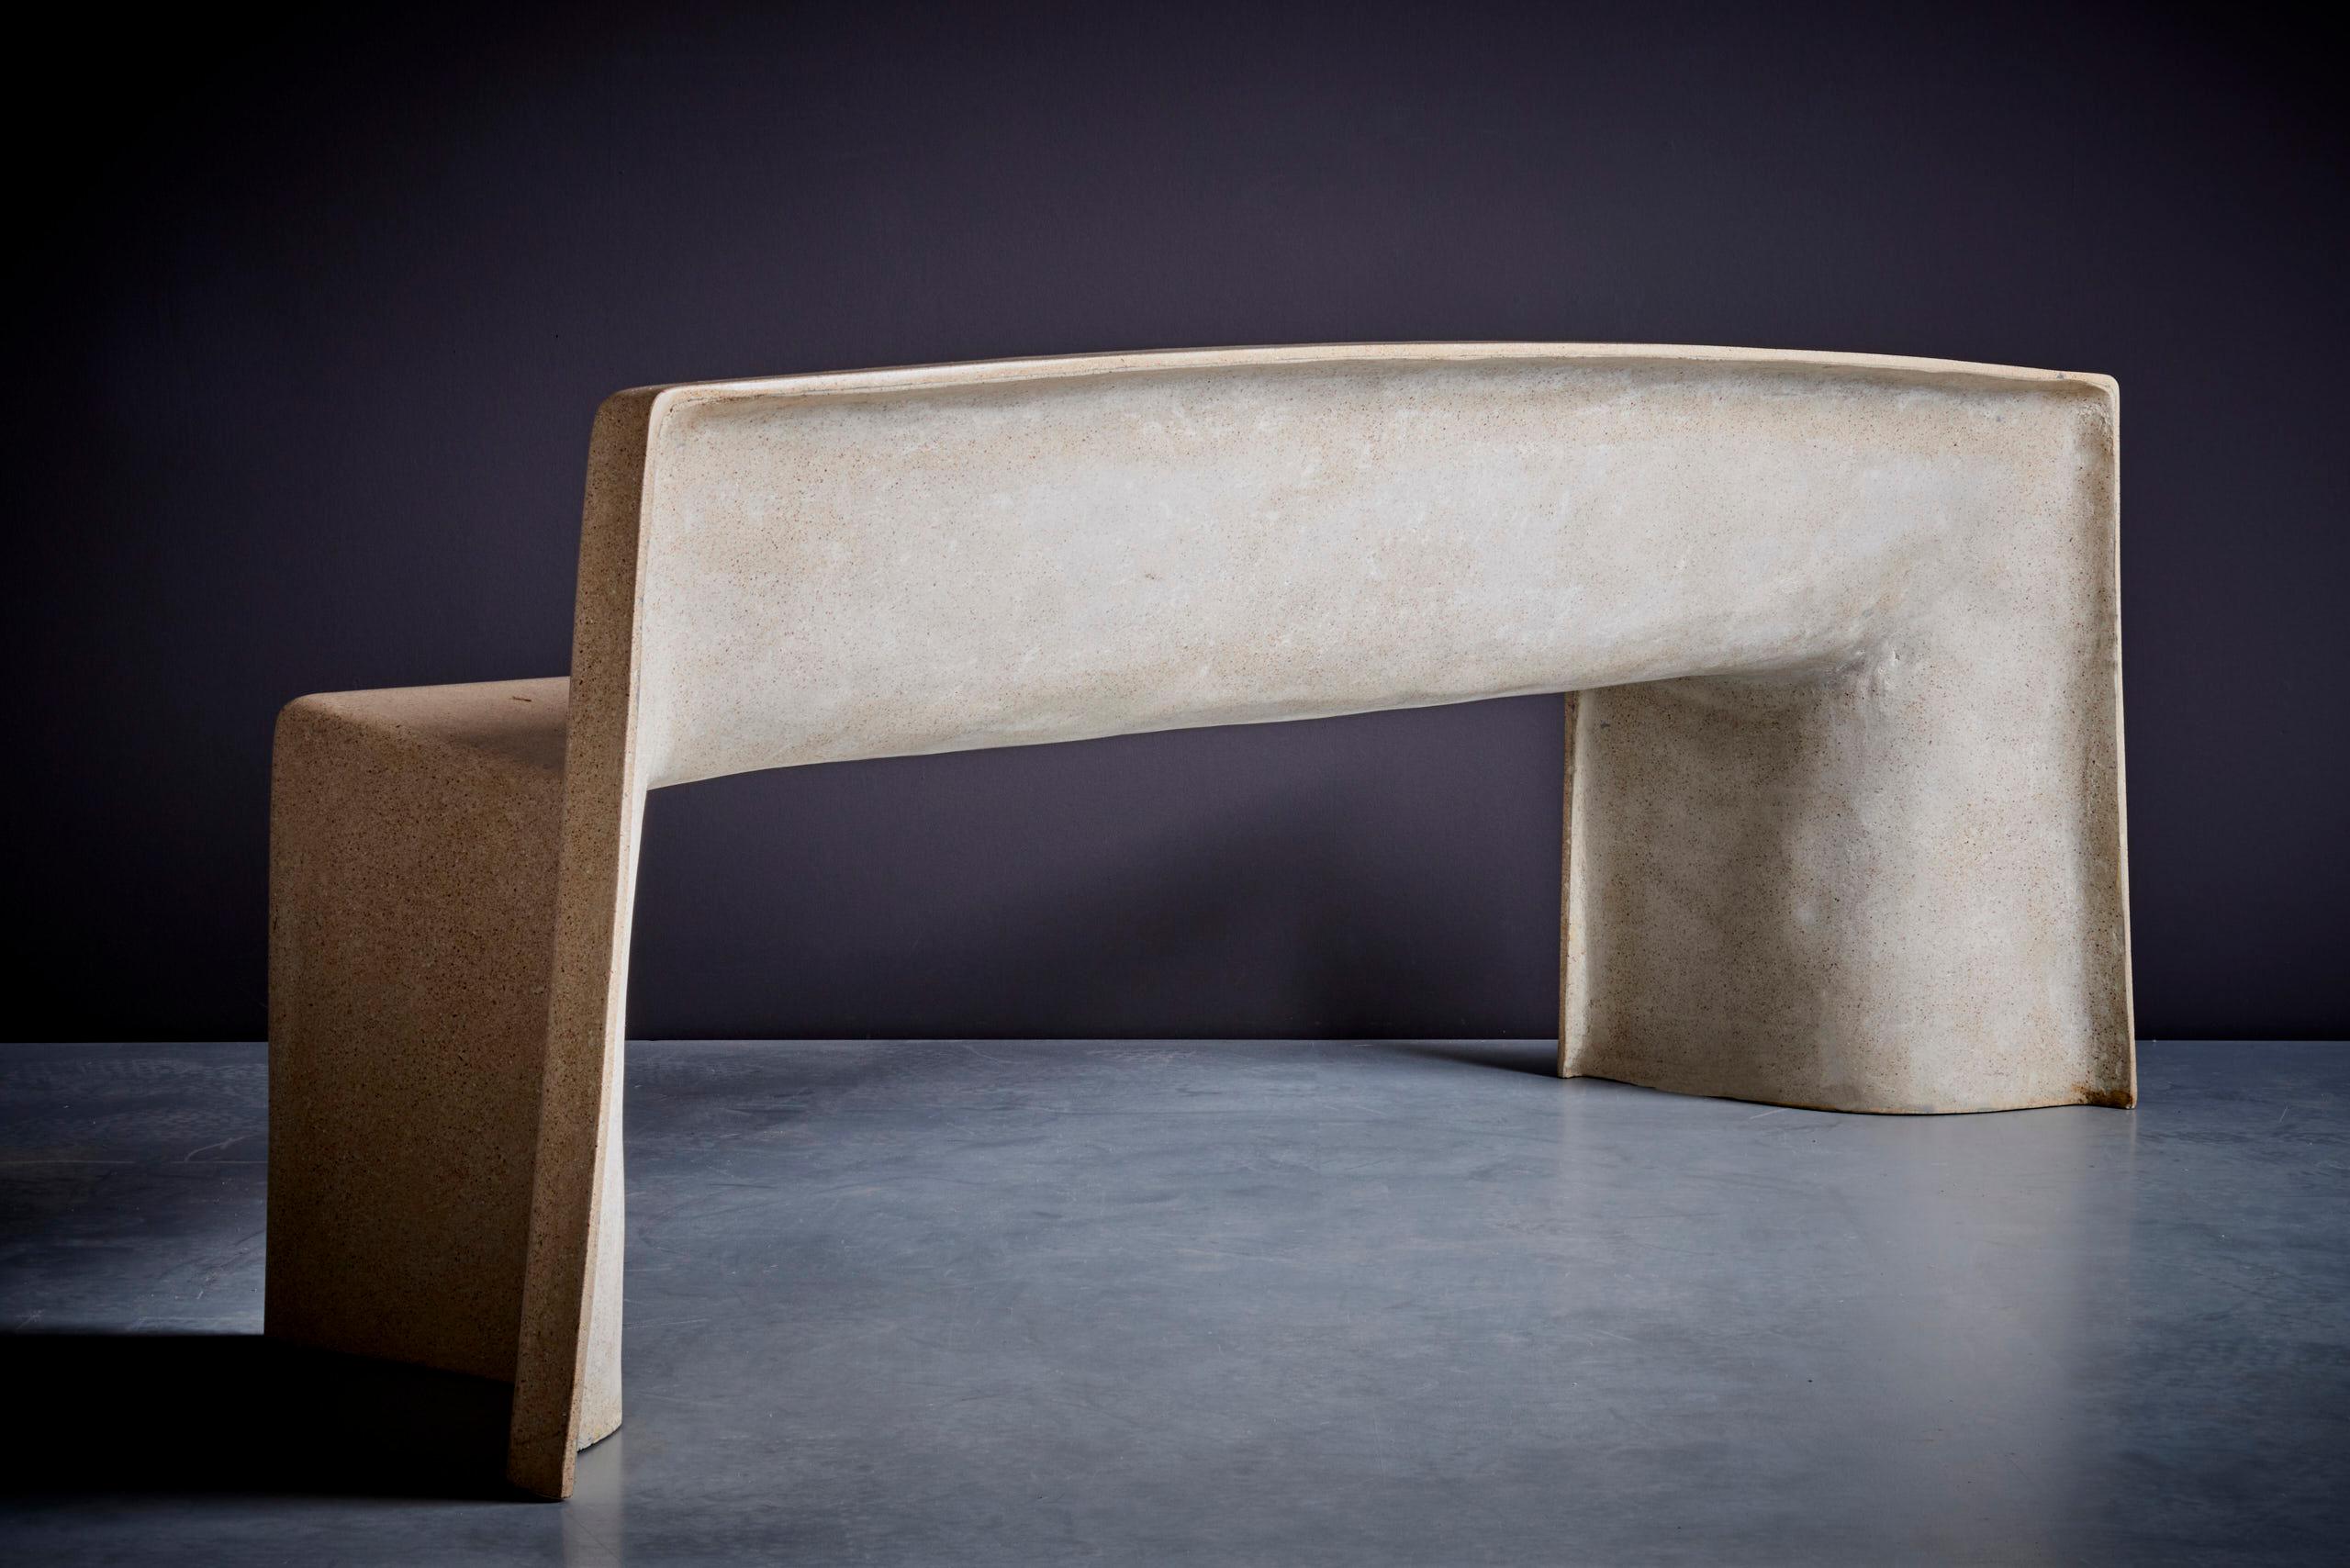 Architectural Concrete Bench by Martin Kleppe, Germany, circa 2011 For Sale 3